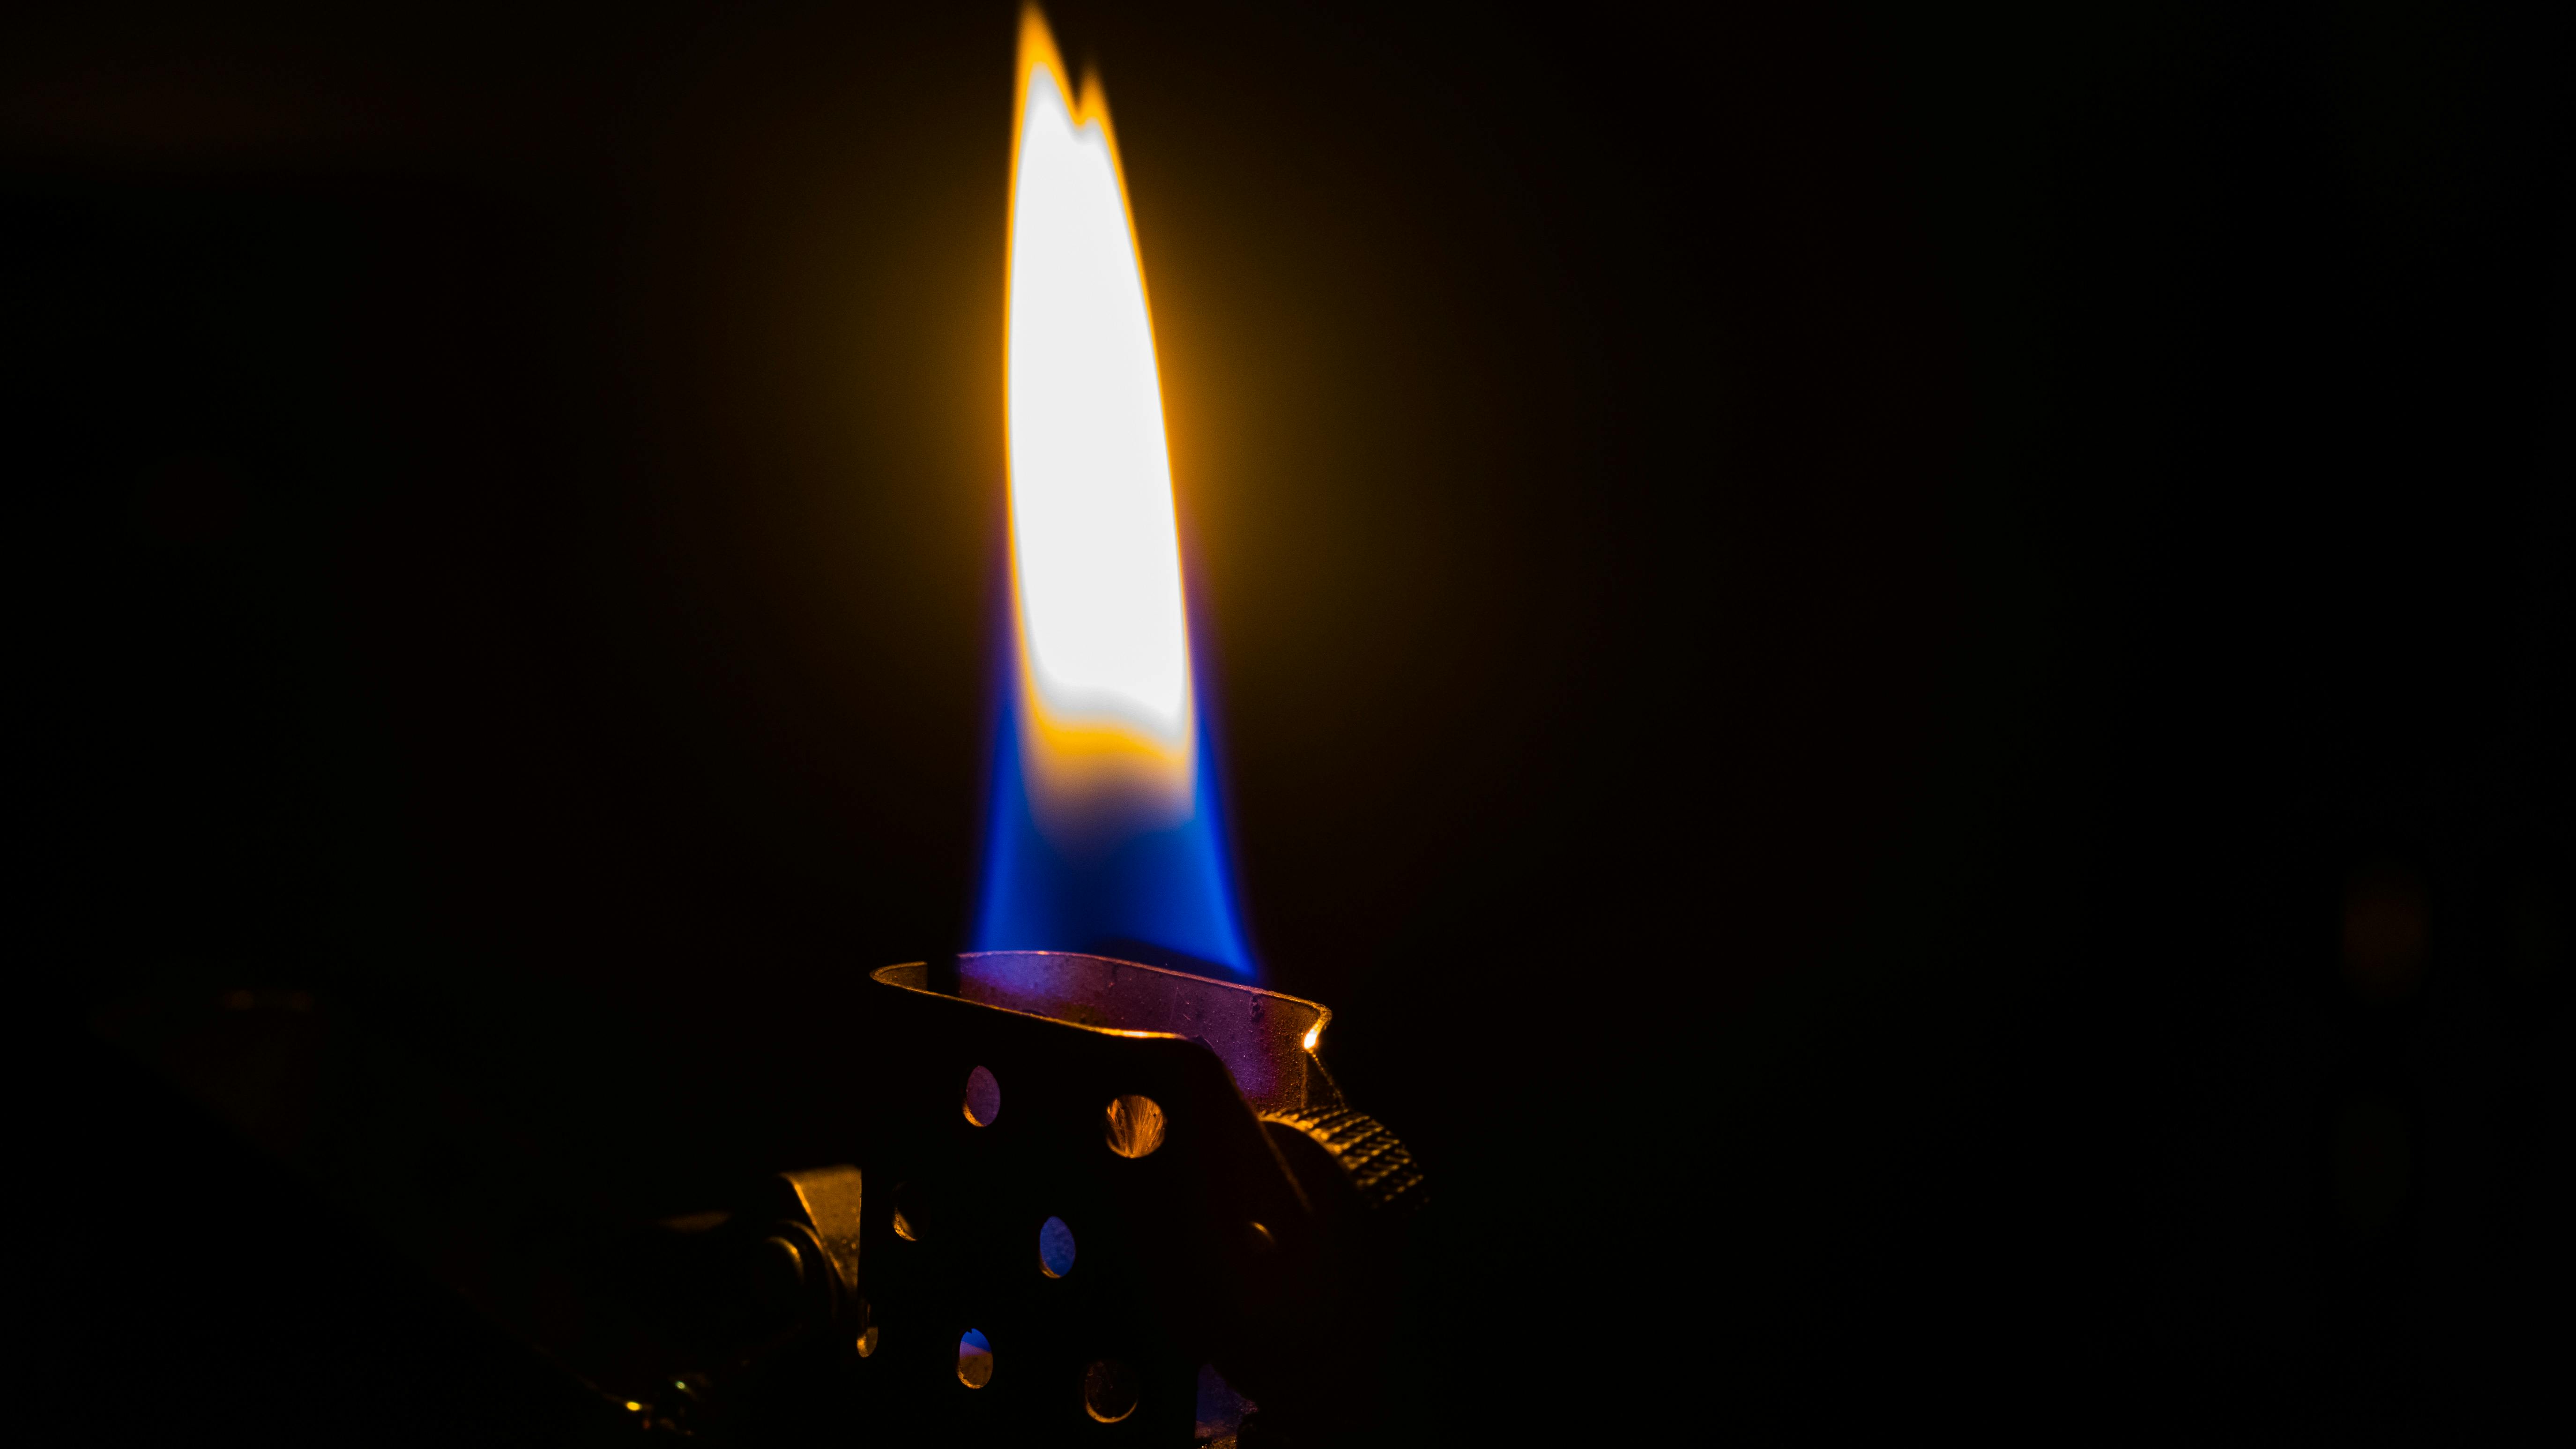 Free stock photo of fire, flame, heat